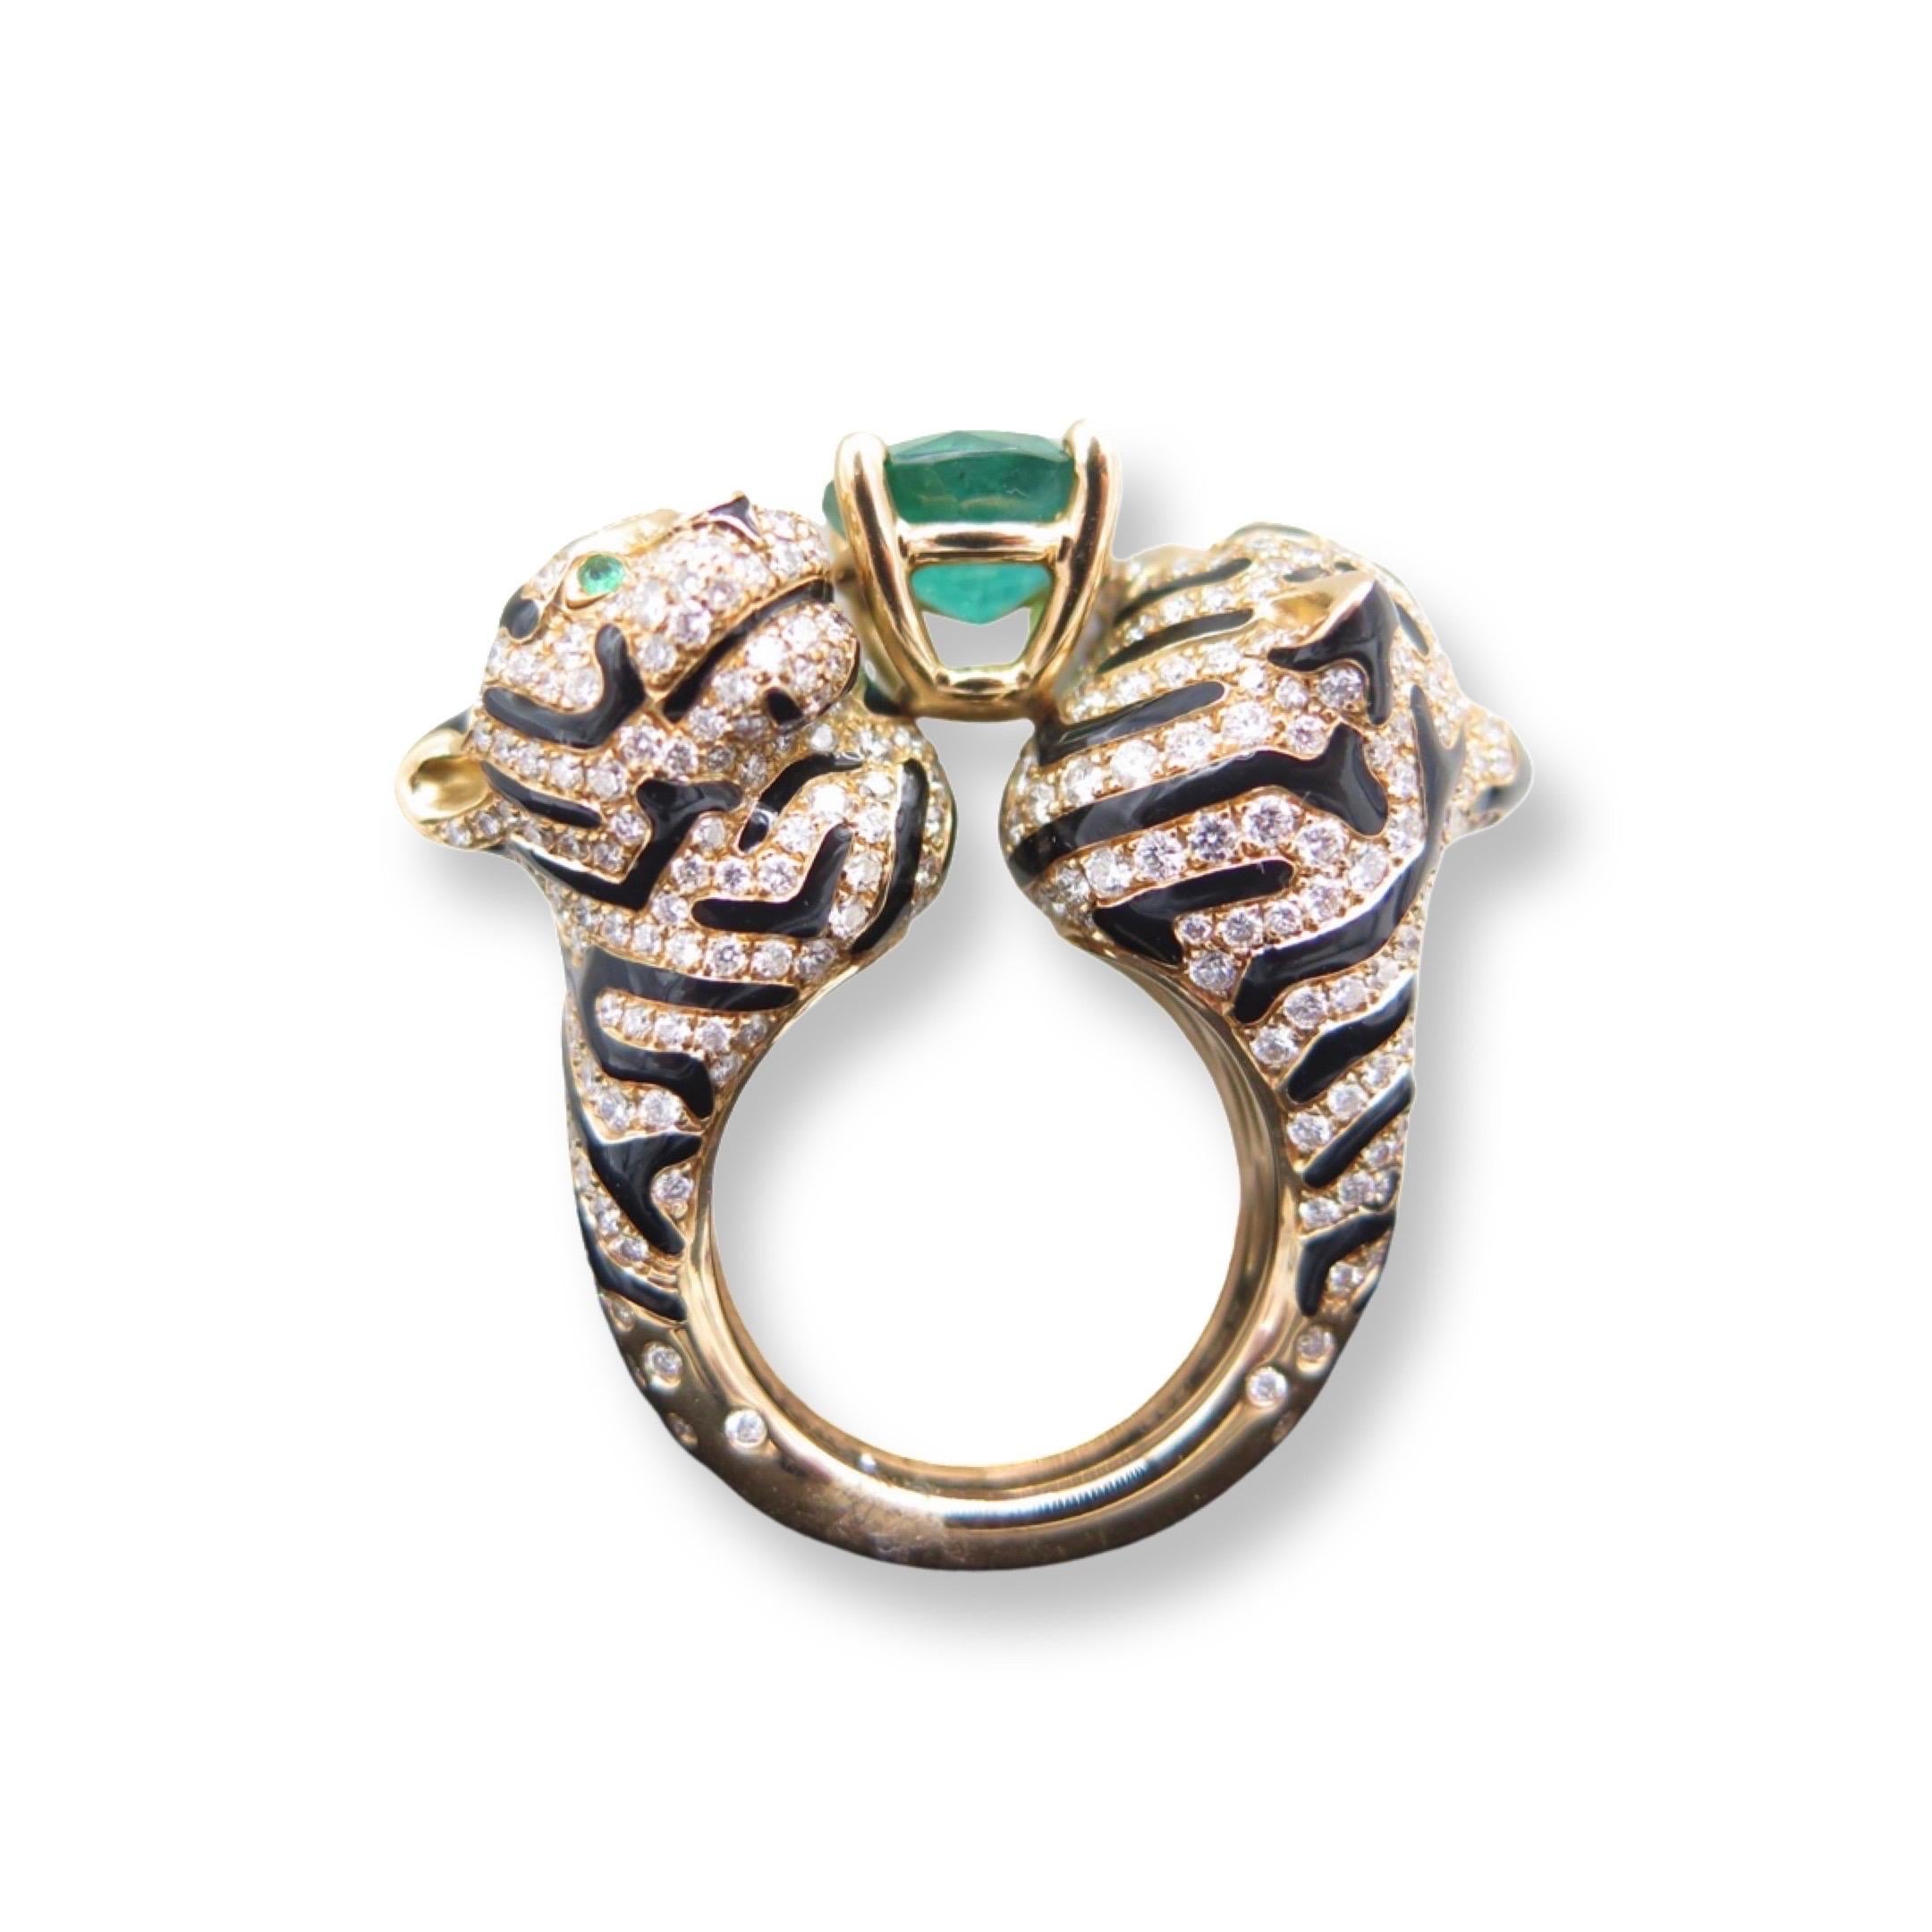 A, beautifully designed and crafted “Baby Tiger” ring by Nina & Ko, crafted in a beautiful 18kt pink gold it weighs 21.23g. It set with a beautiful 2.83ct Emerald in the center. This, “Baby Tiger” piece also includes an array of beautiful diamonds